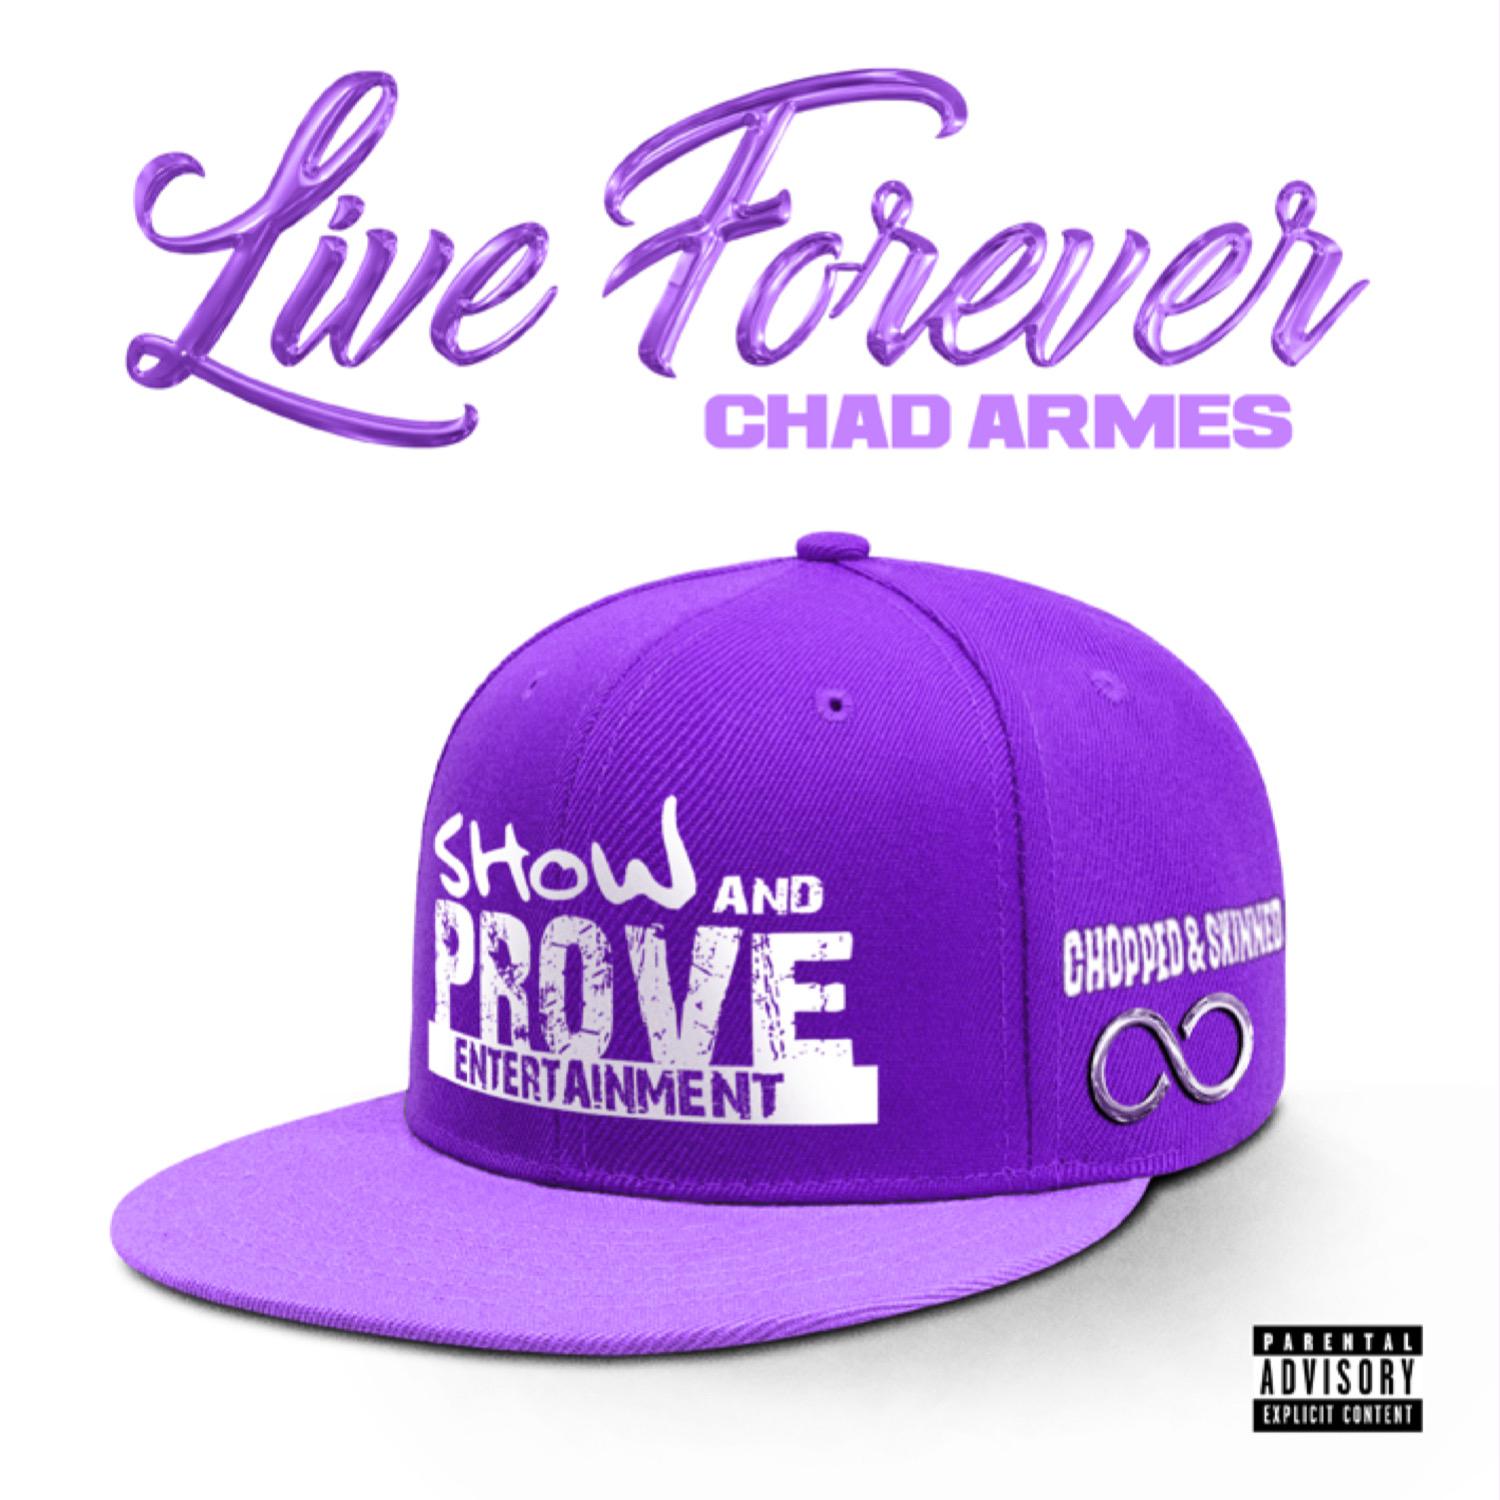 Chad Armes - Live Forever (feat. Upchurch) (Chopped & Skinned)